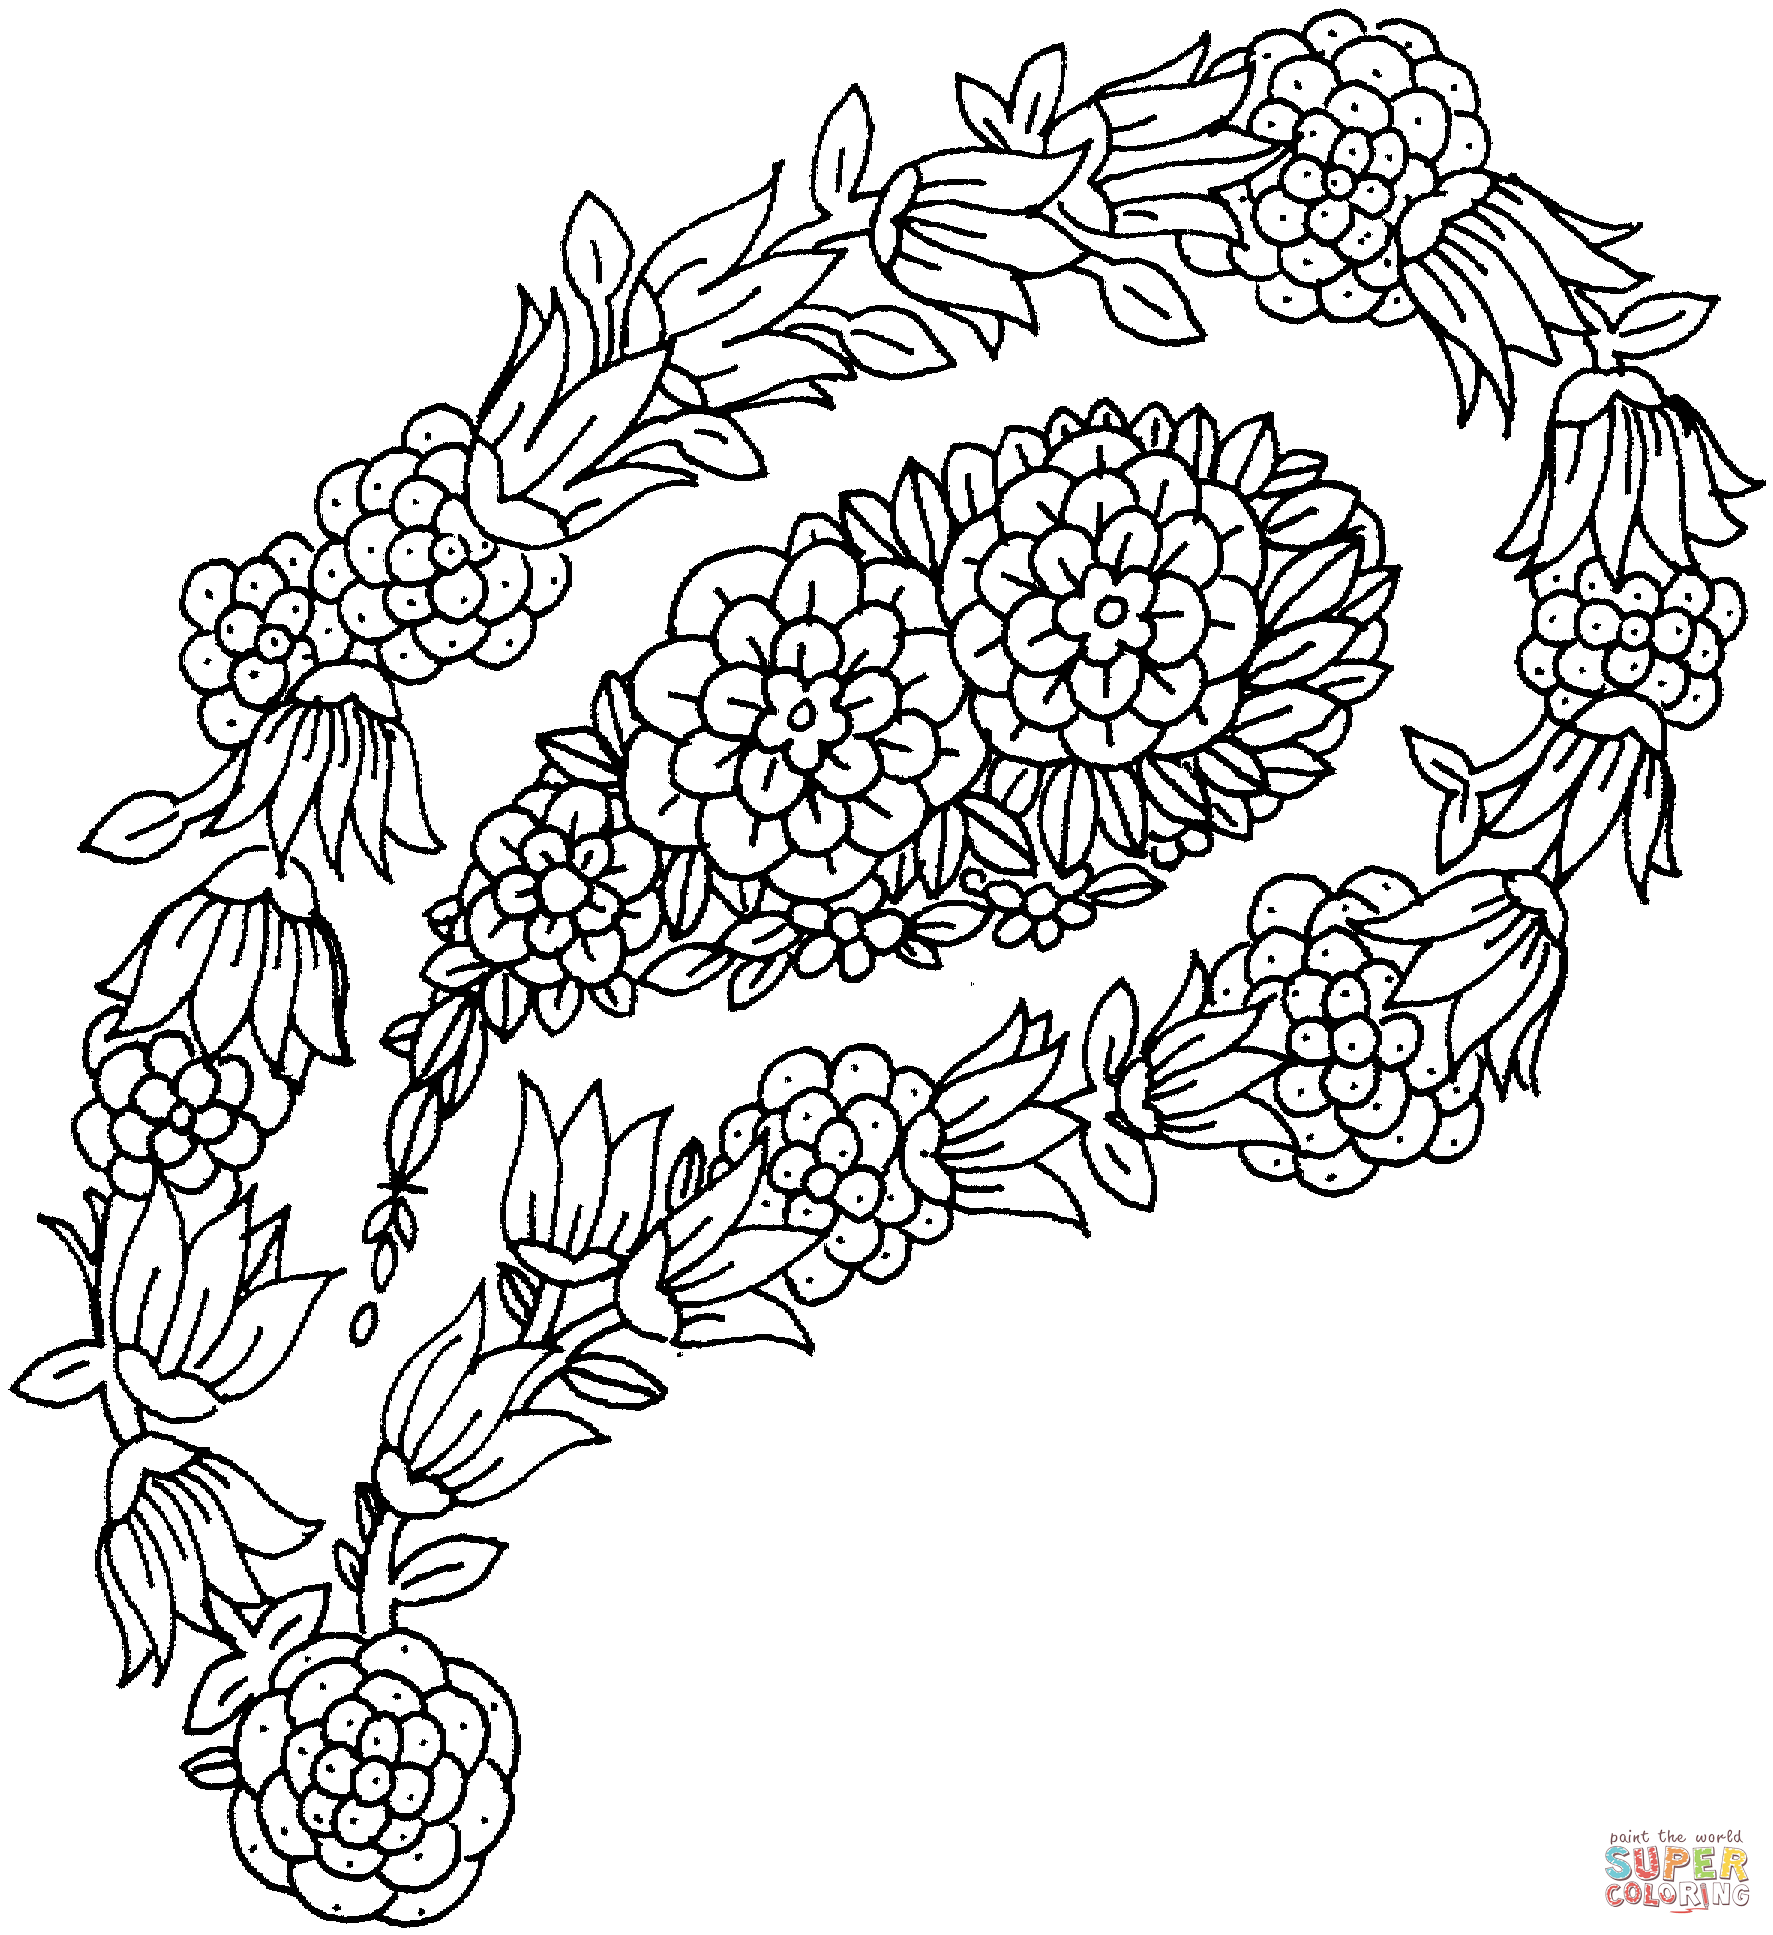 Paisley designs coloring pages | Free Coloring Pages